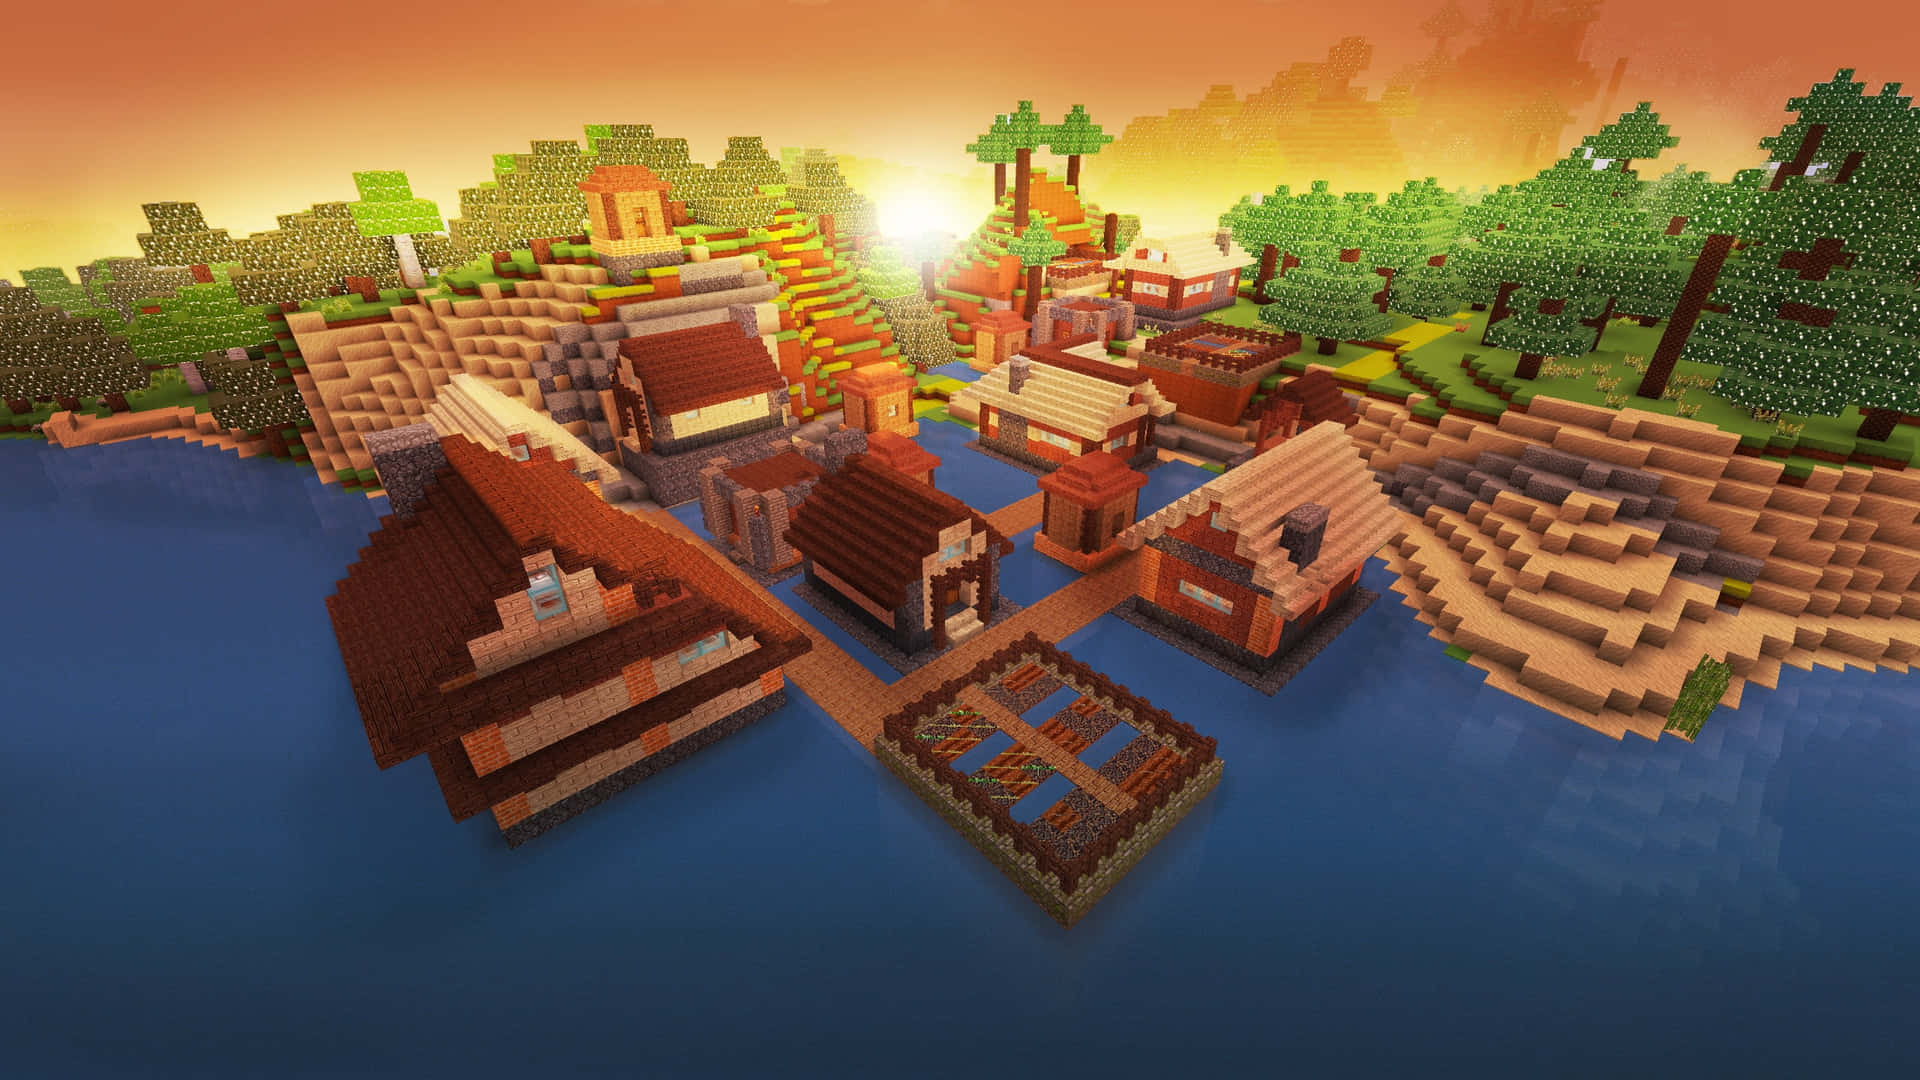 A Minecraft Village With A Sunset